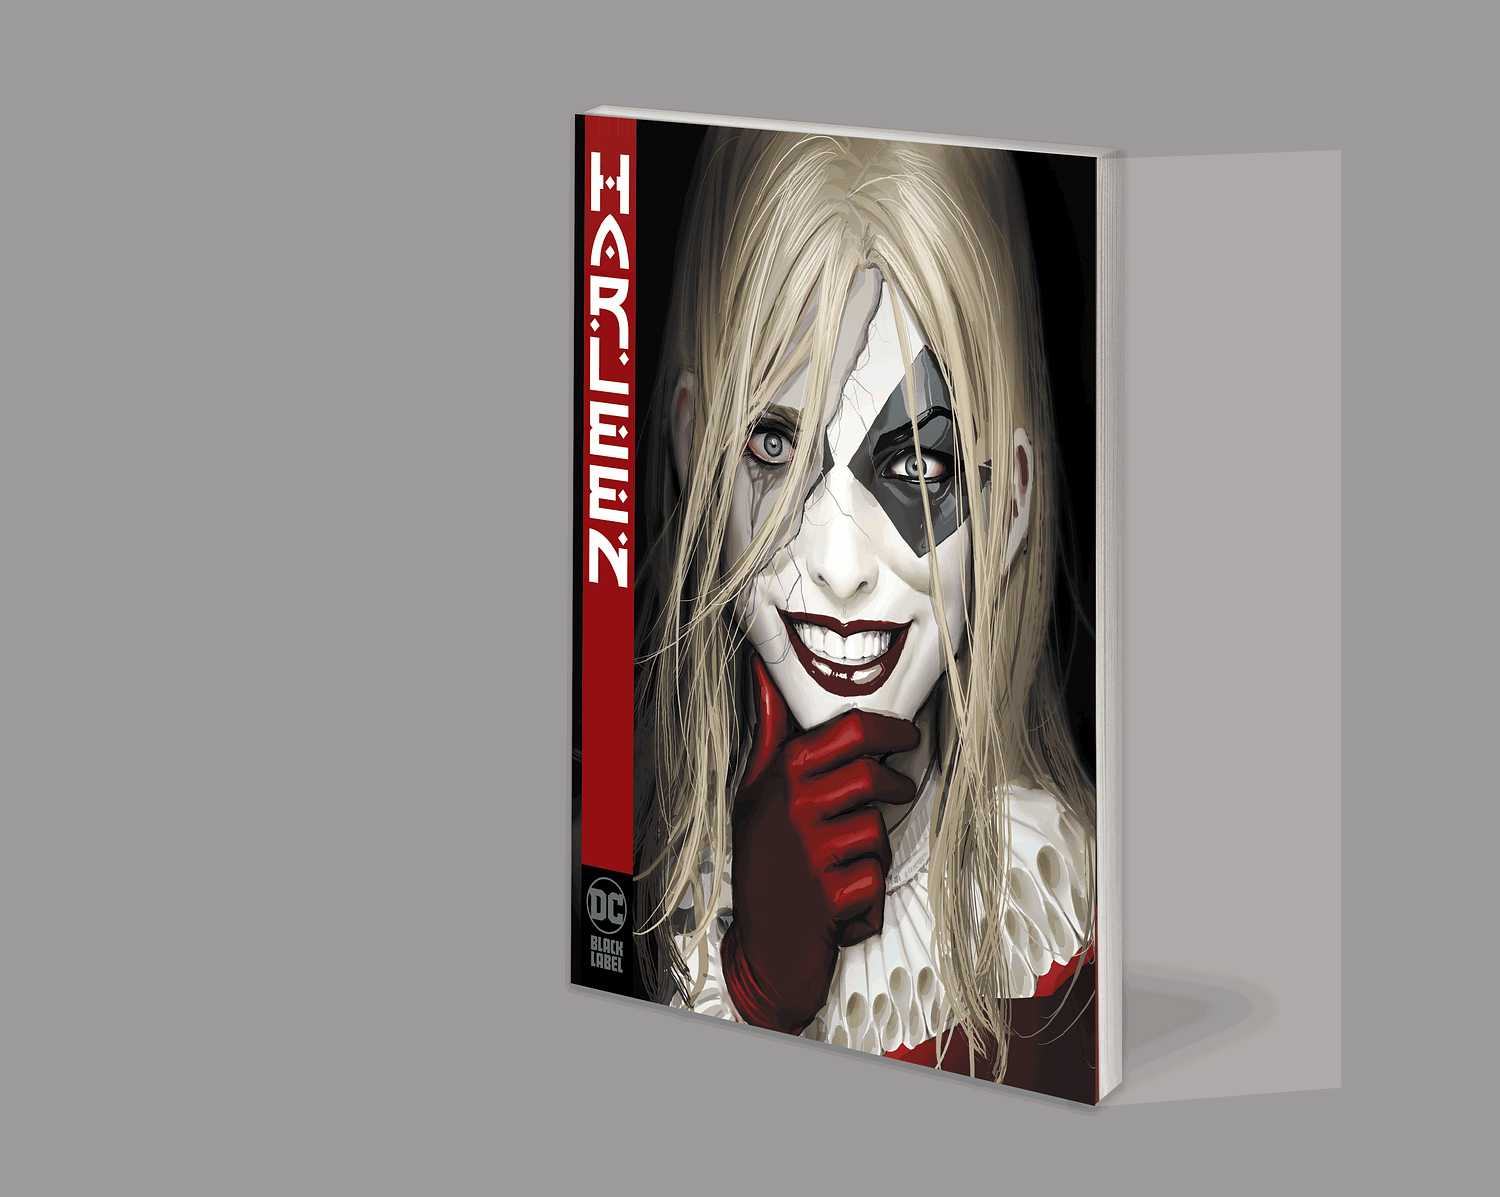 Stjepan Sejic's Harleen to Get a Hardcover Acetate Double Cover Too